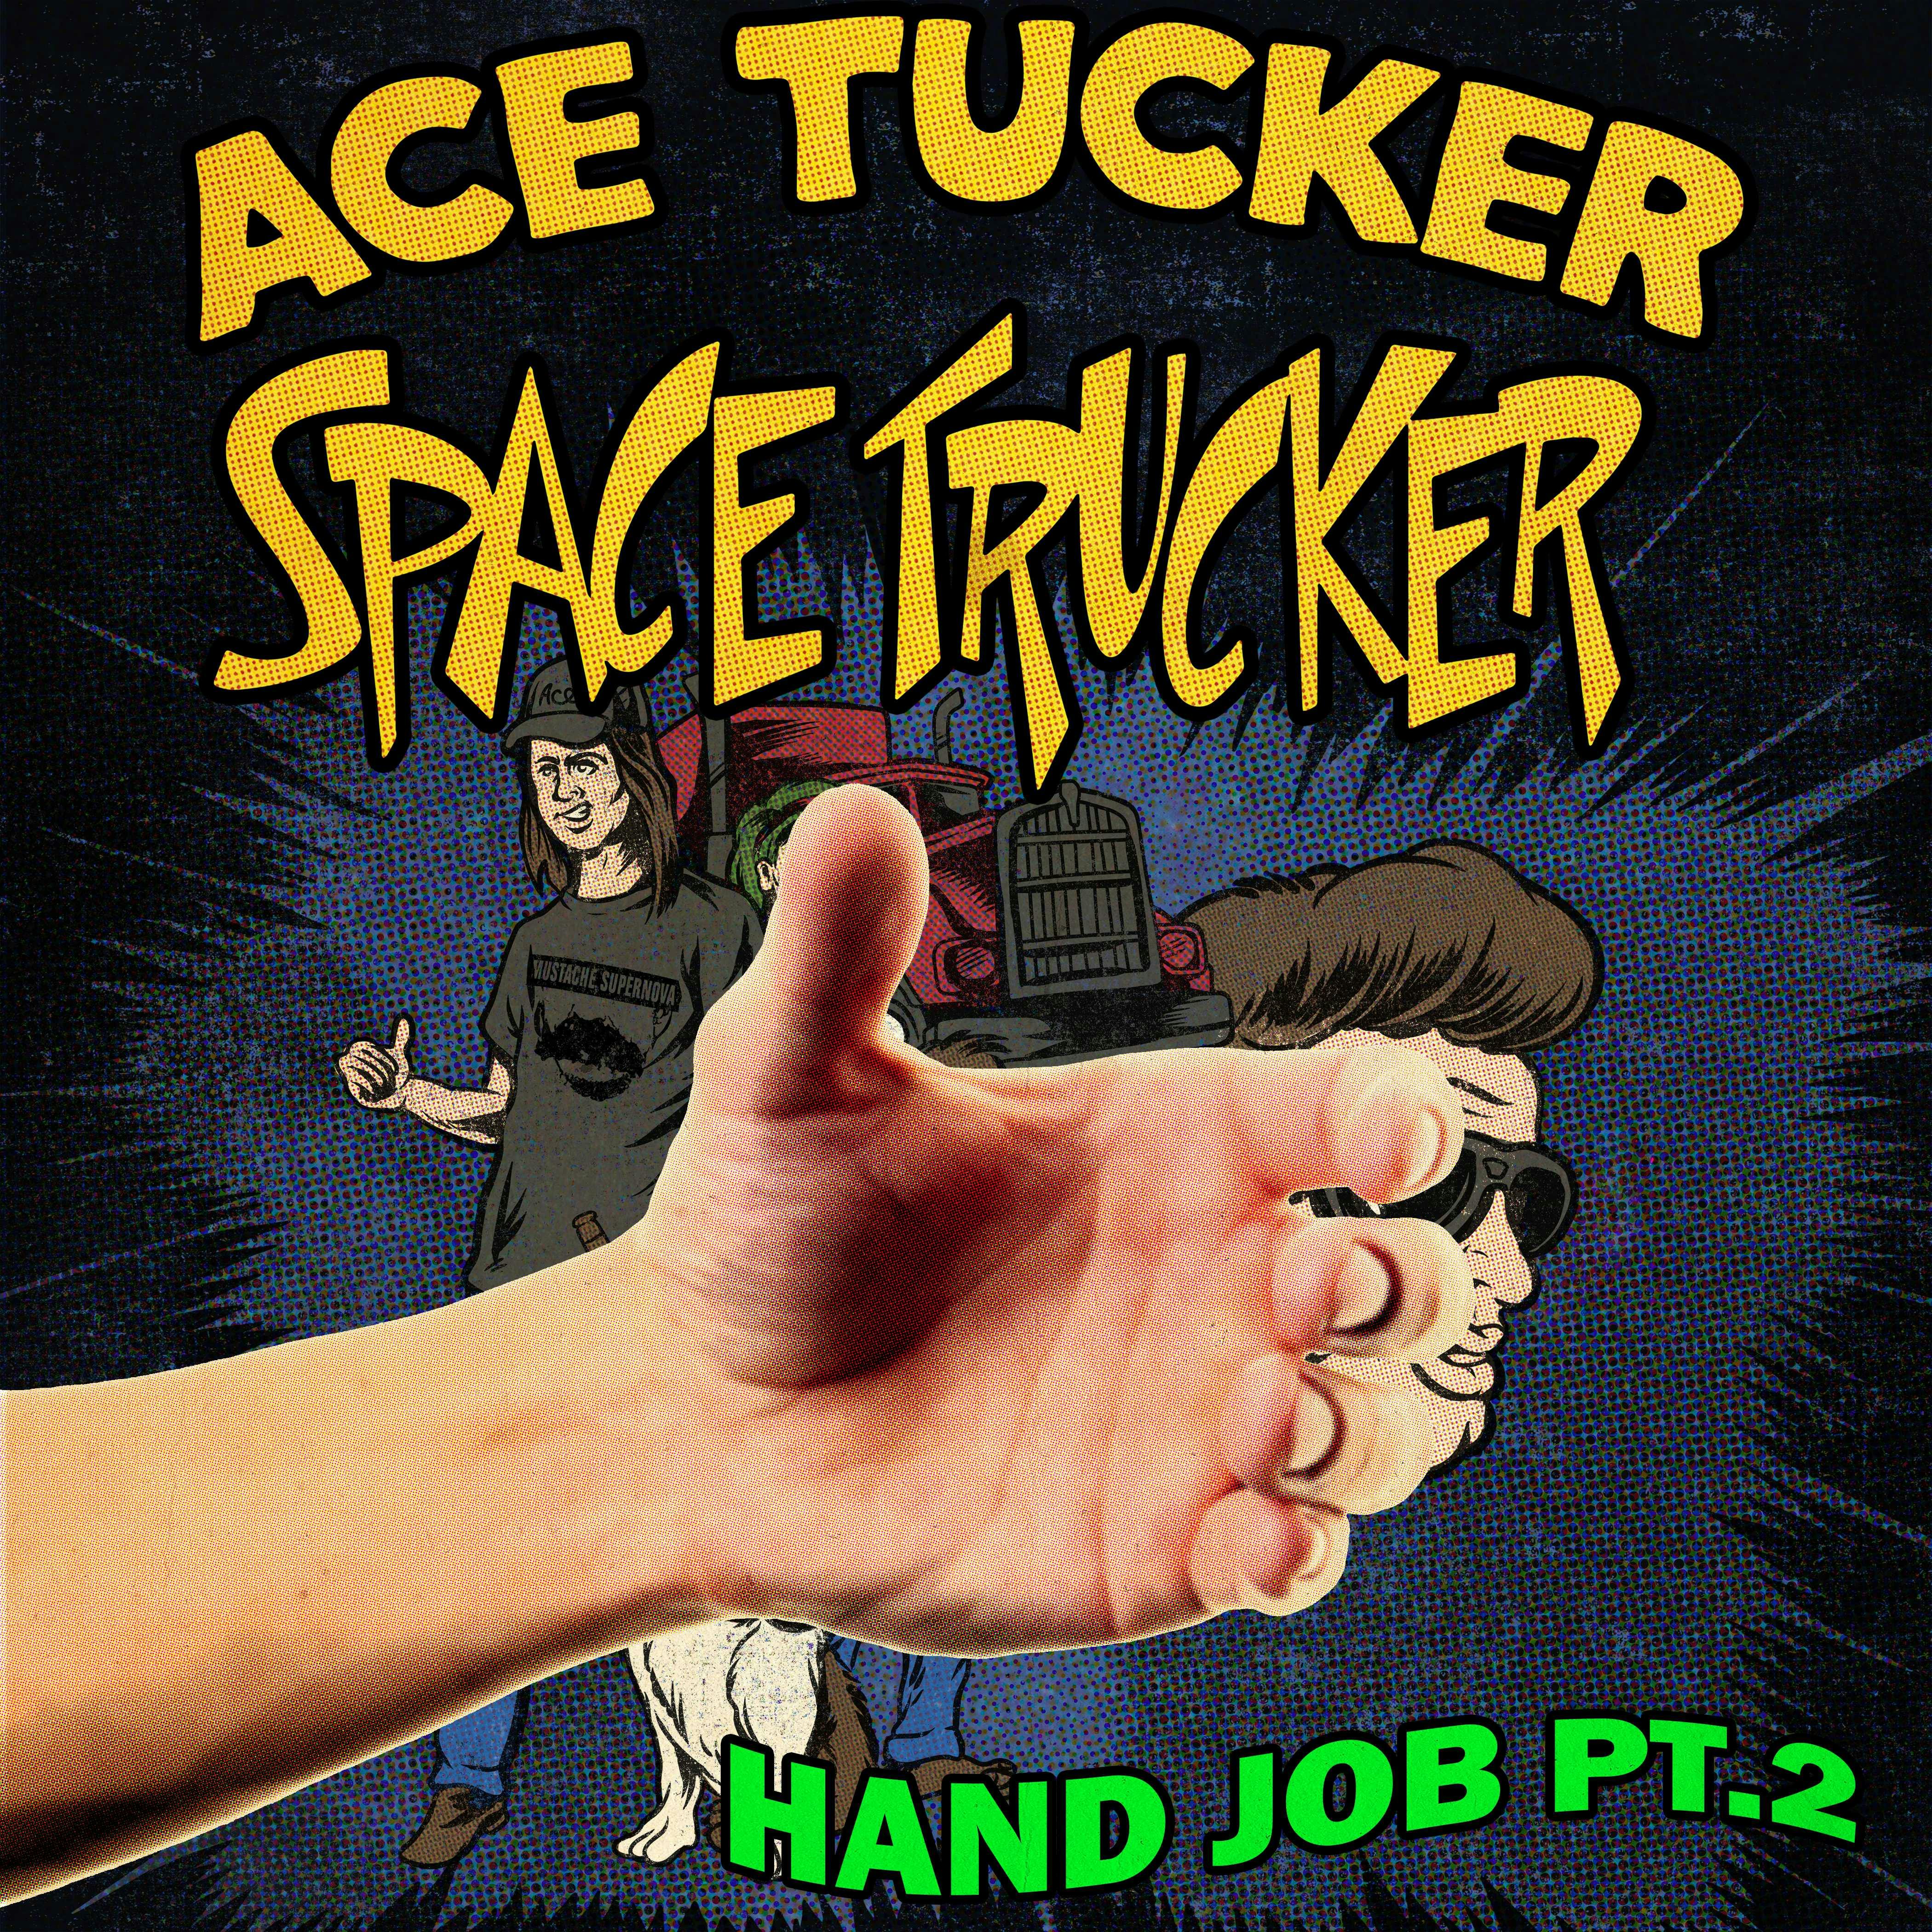 The HJ Part 2: An Ace Tucker Space Trucker Adventure - undefined